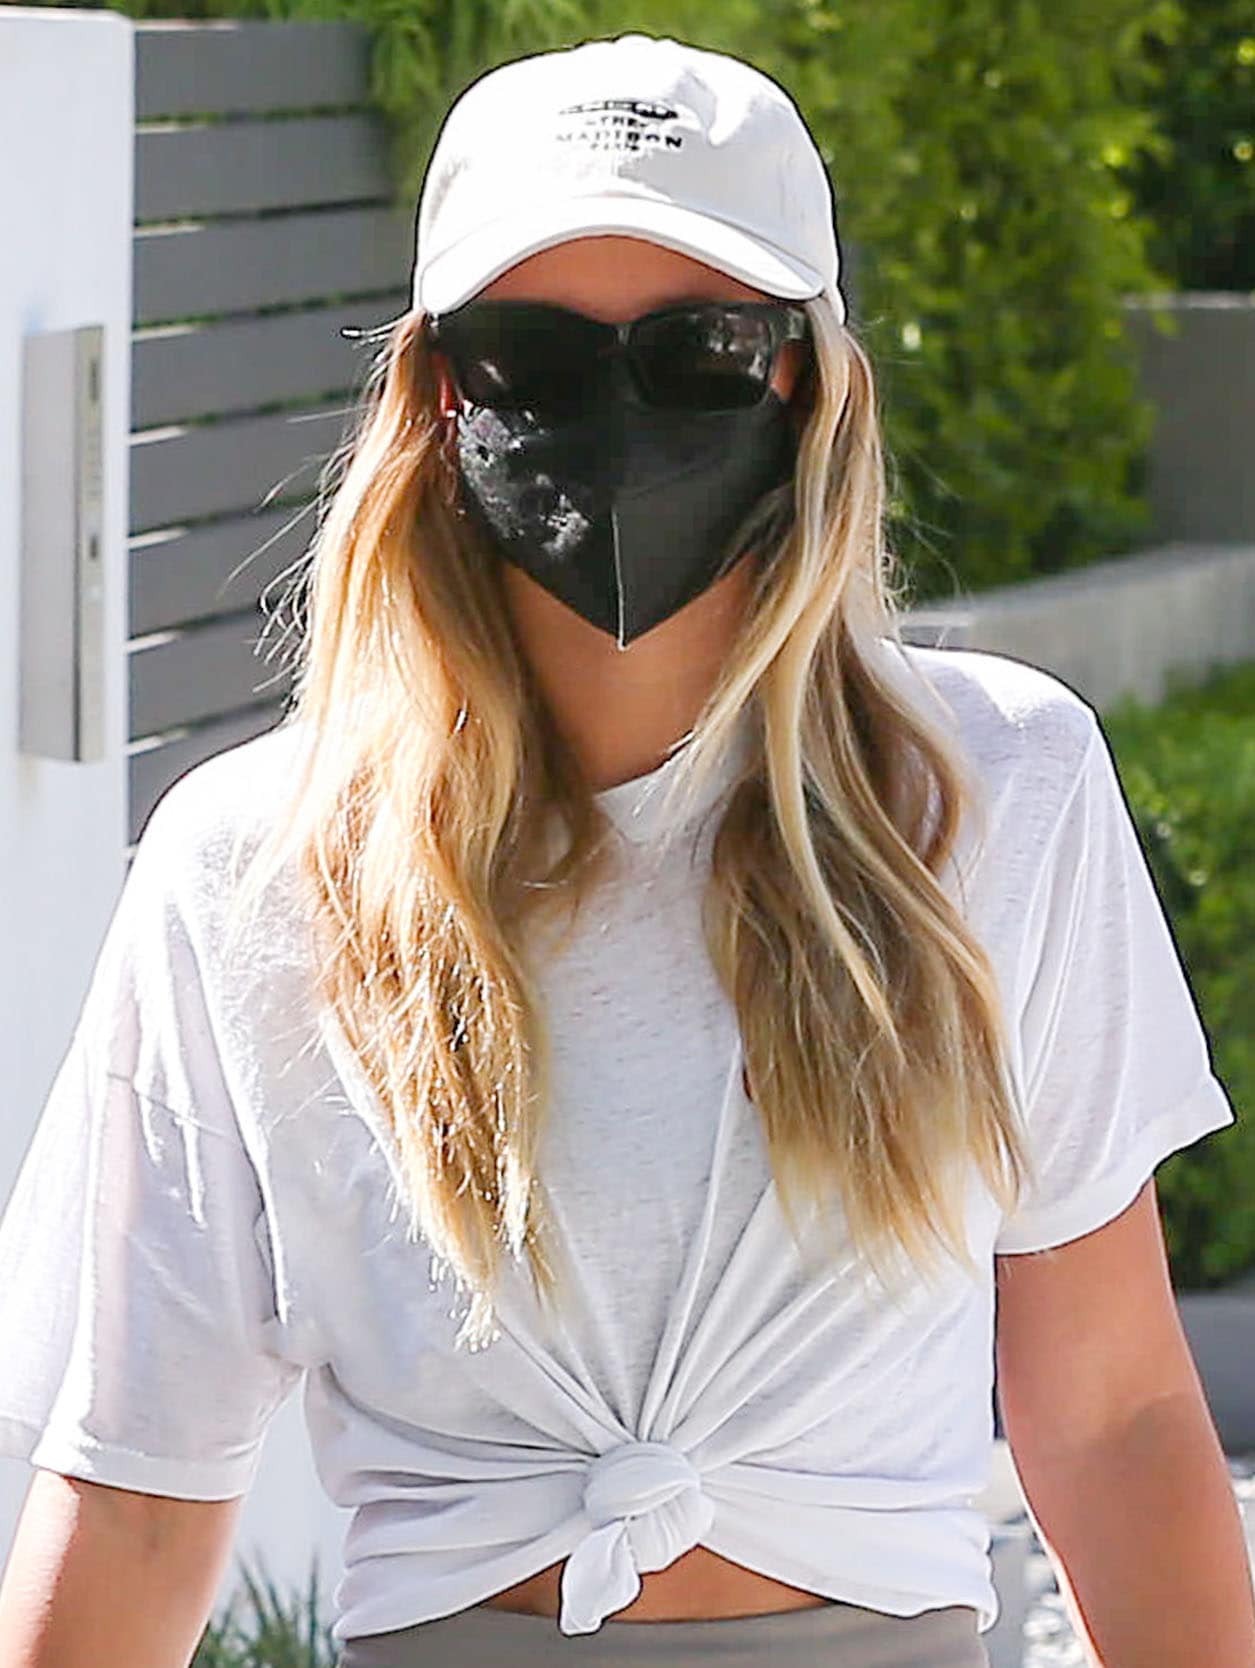 Sofia Richie keeps the sporty vibe of her look with a white The Madison Club baseball cap